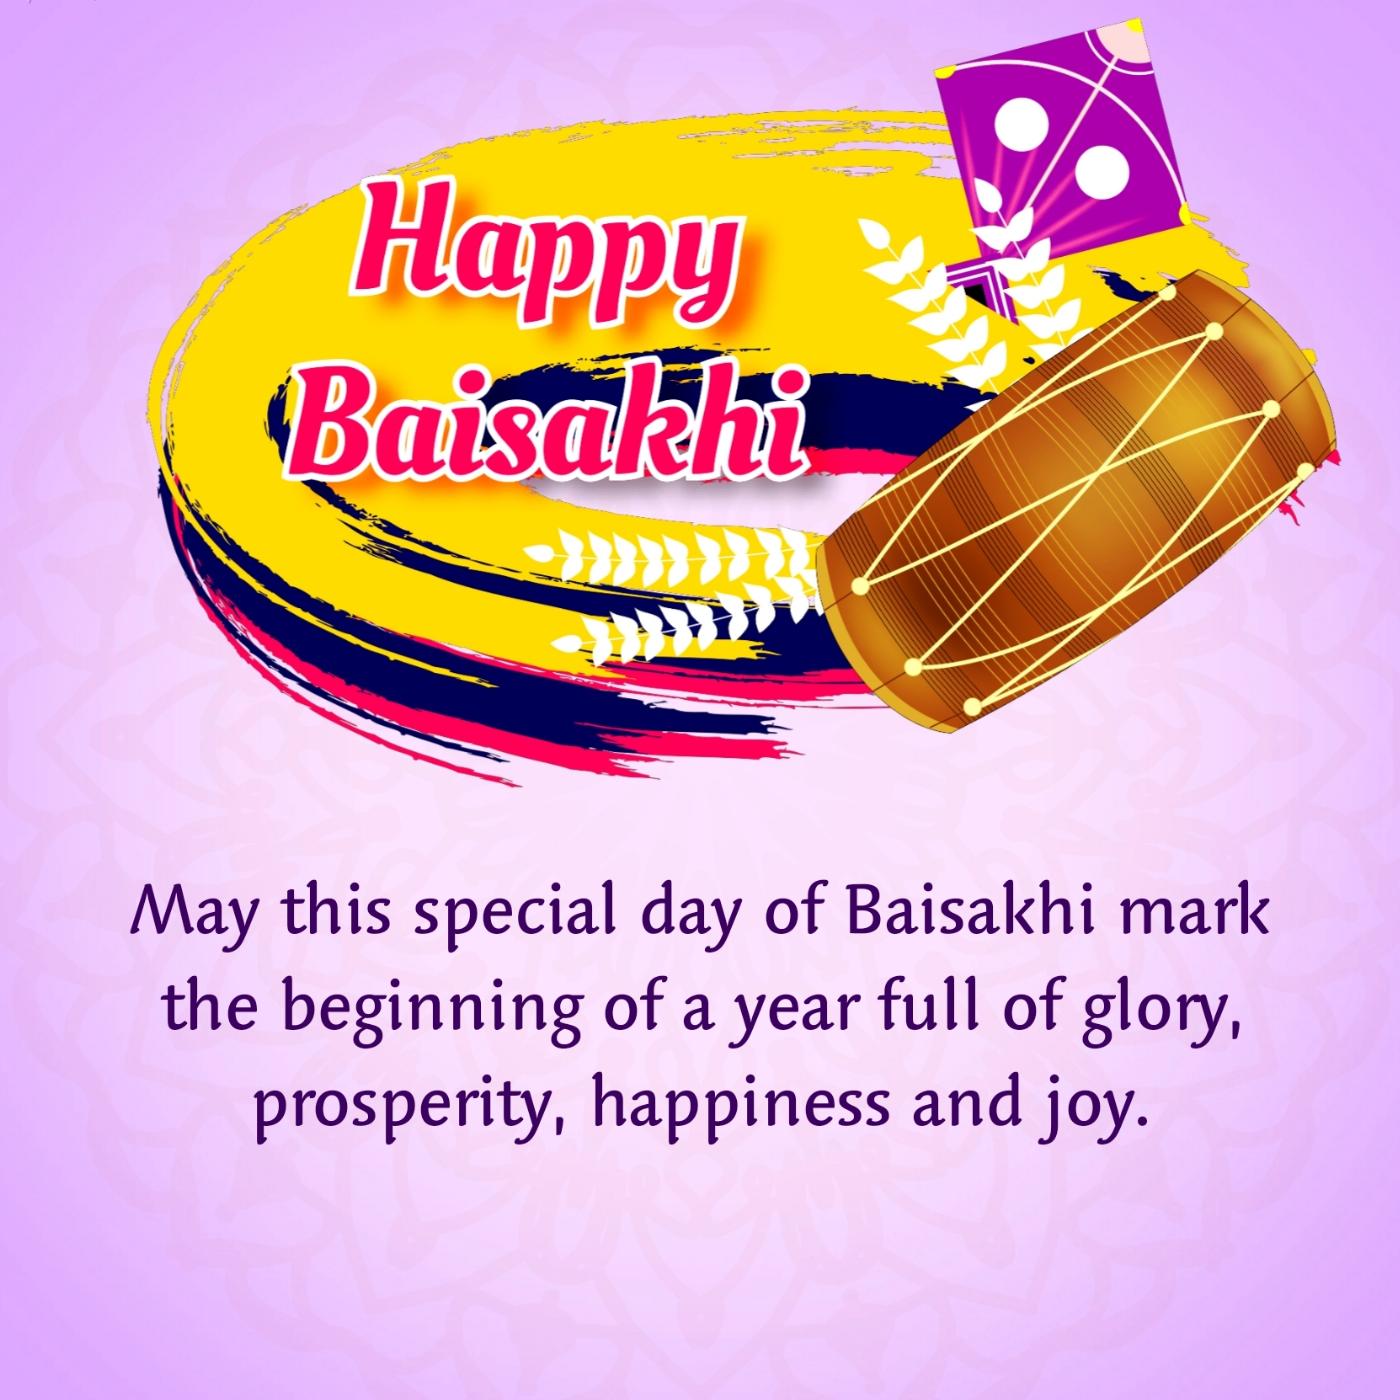 May this special day of Baisakhi mark the beginning of a year